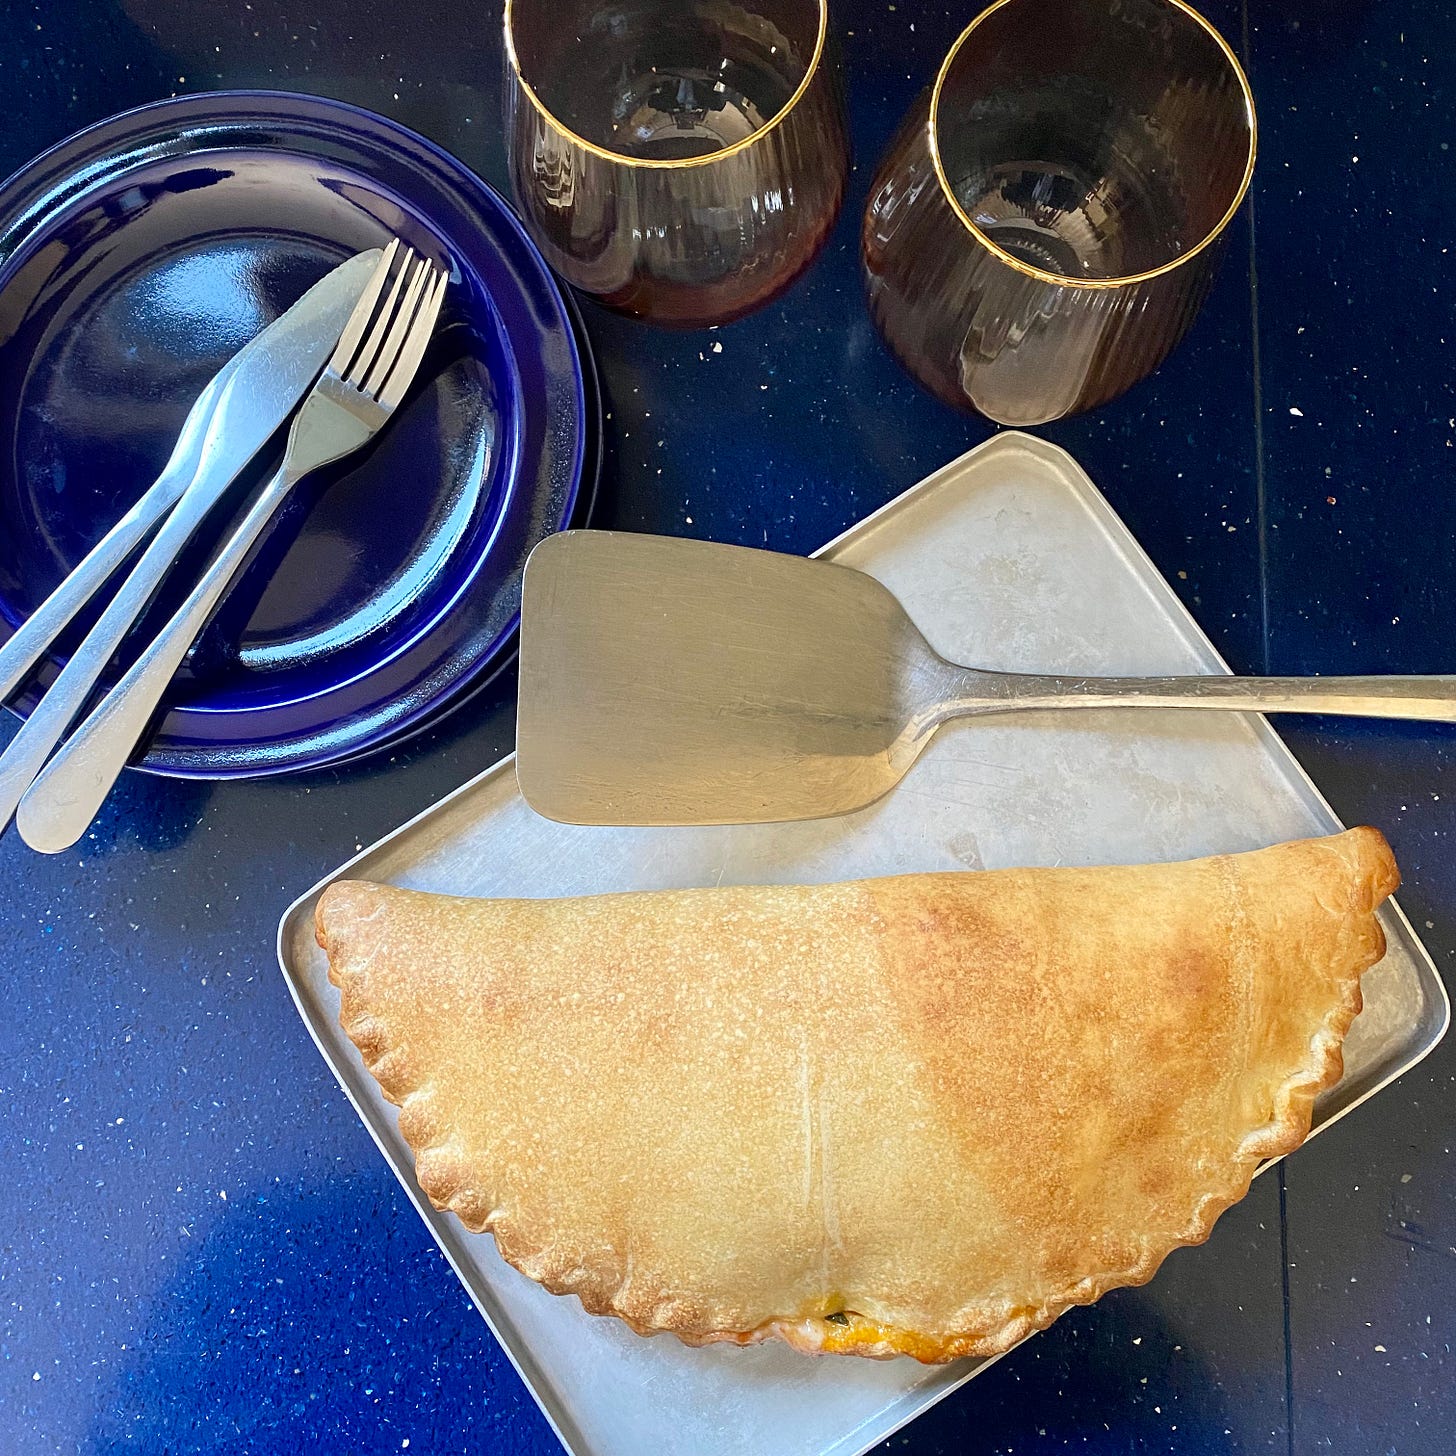 Calzone on a silver baking tray, blue plates with cutlery to the side. 